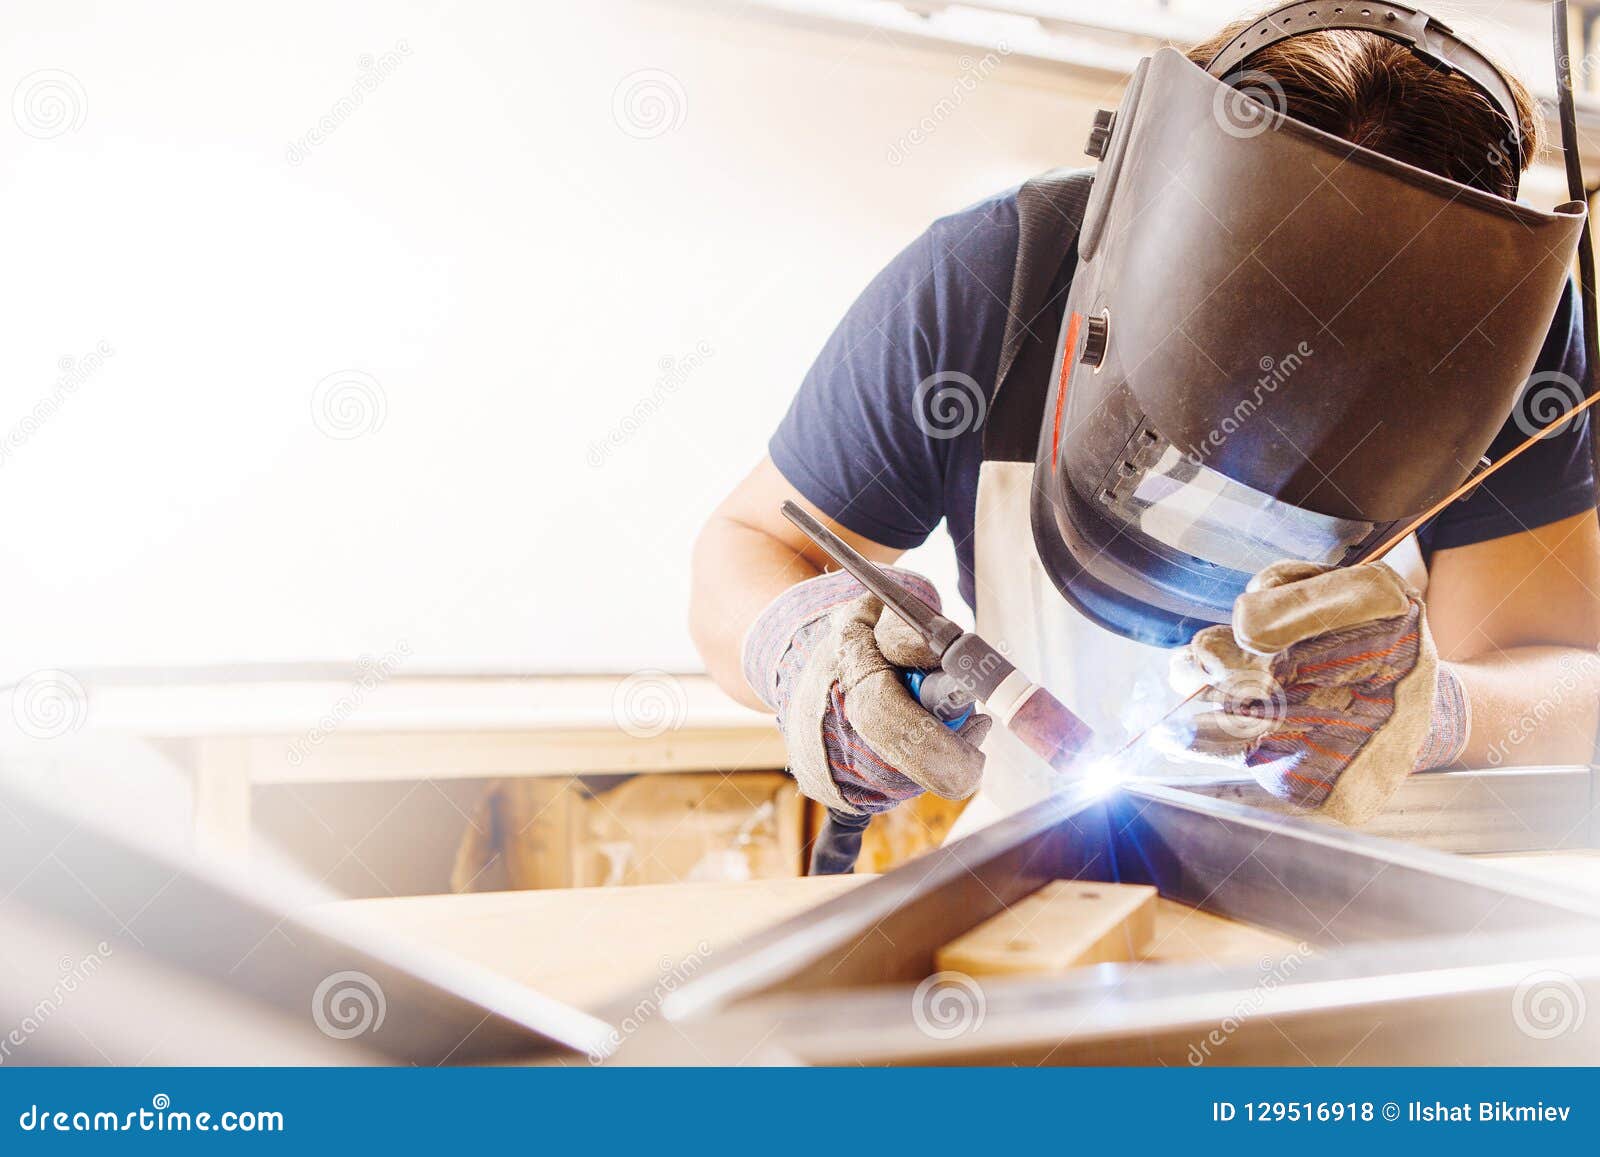 male in face mask welds with argon-arc welding